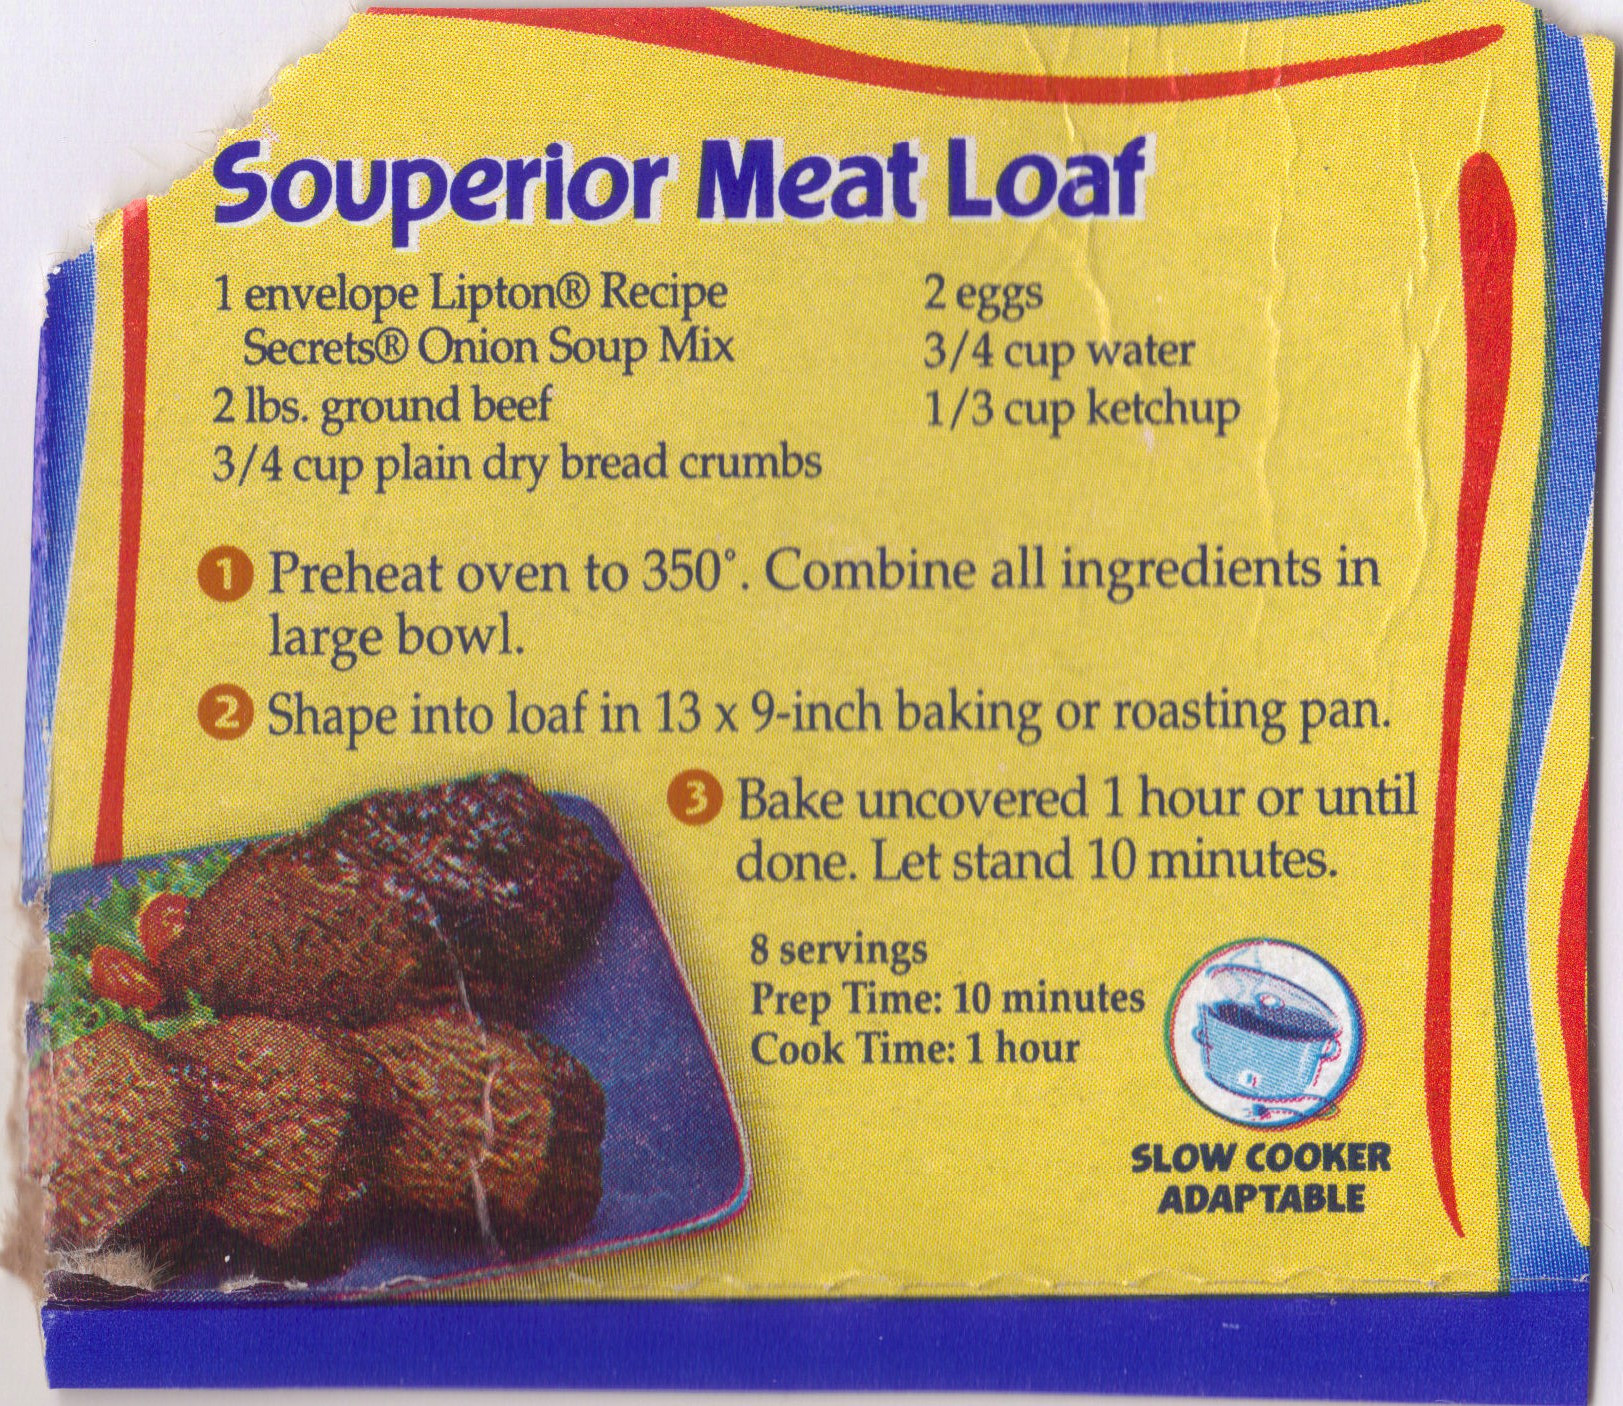 Lipton Onion Soup Mix Meatloaf
 meatloaf with onion soup mix and evaporated milk